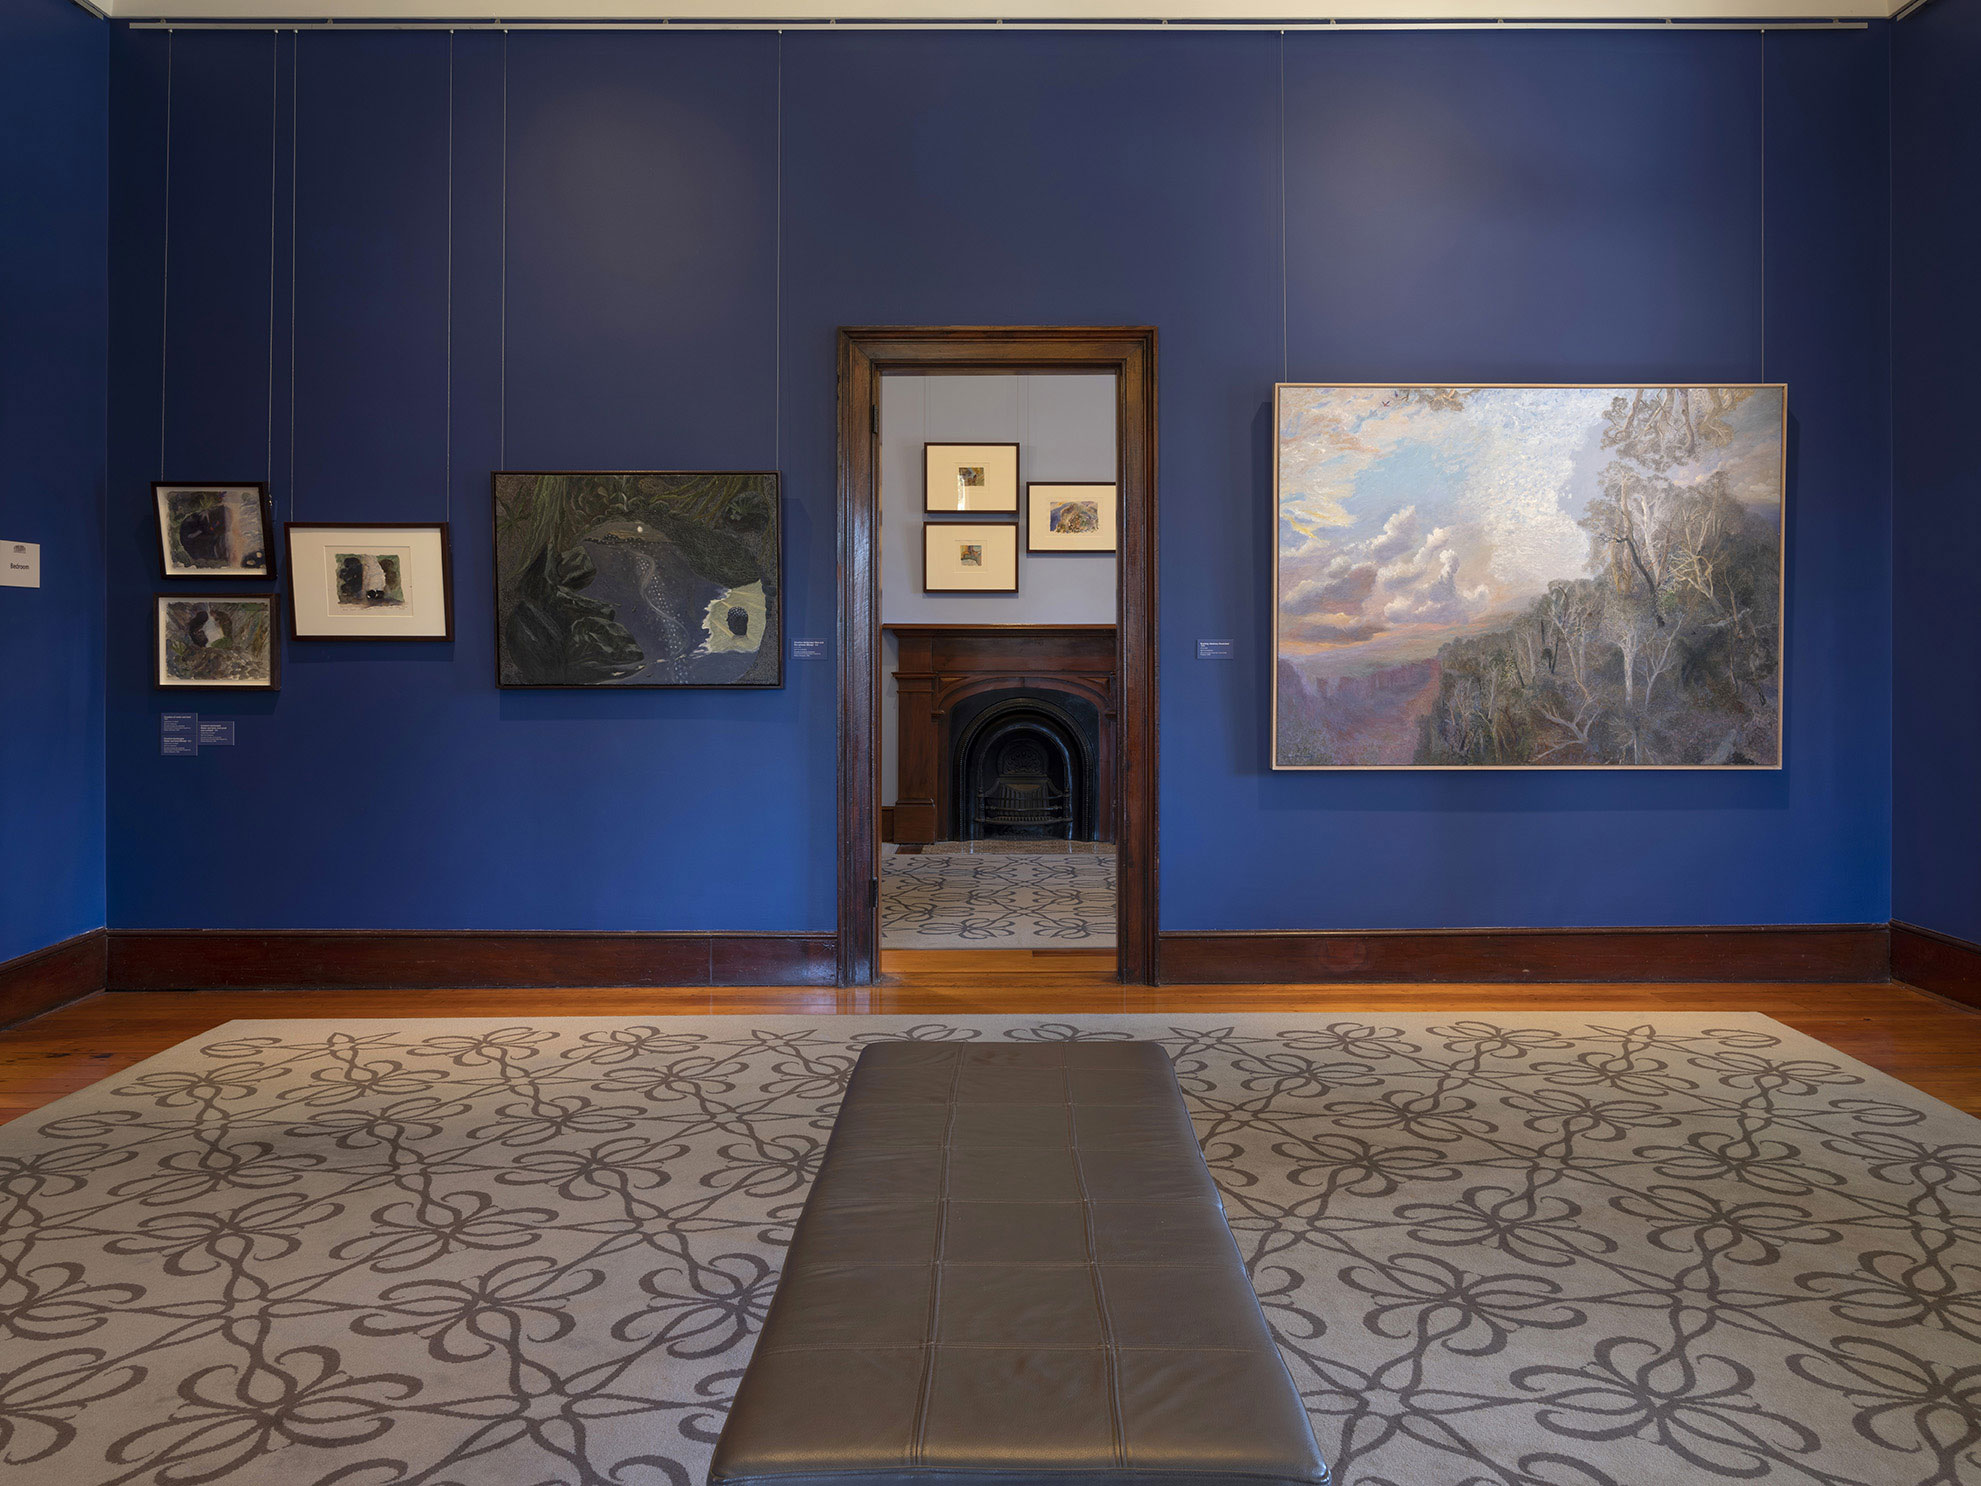 Installation view of 'William Robinson: Elixir of light' (4 July 2019 - 14 June 2020), William Robinson Gallery. Photo by Carl Warner.